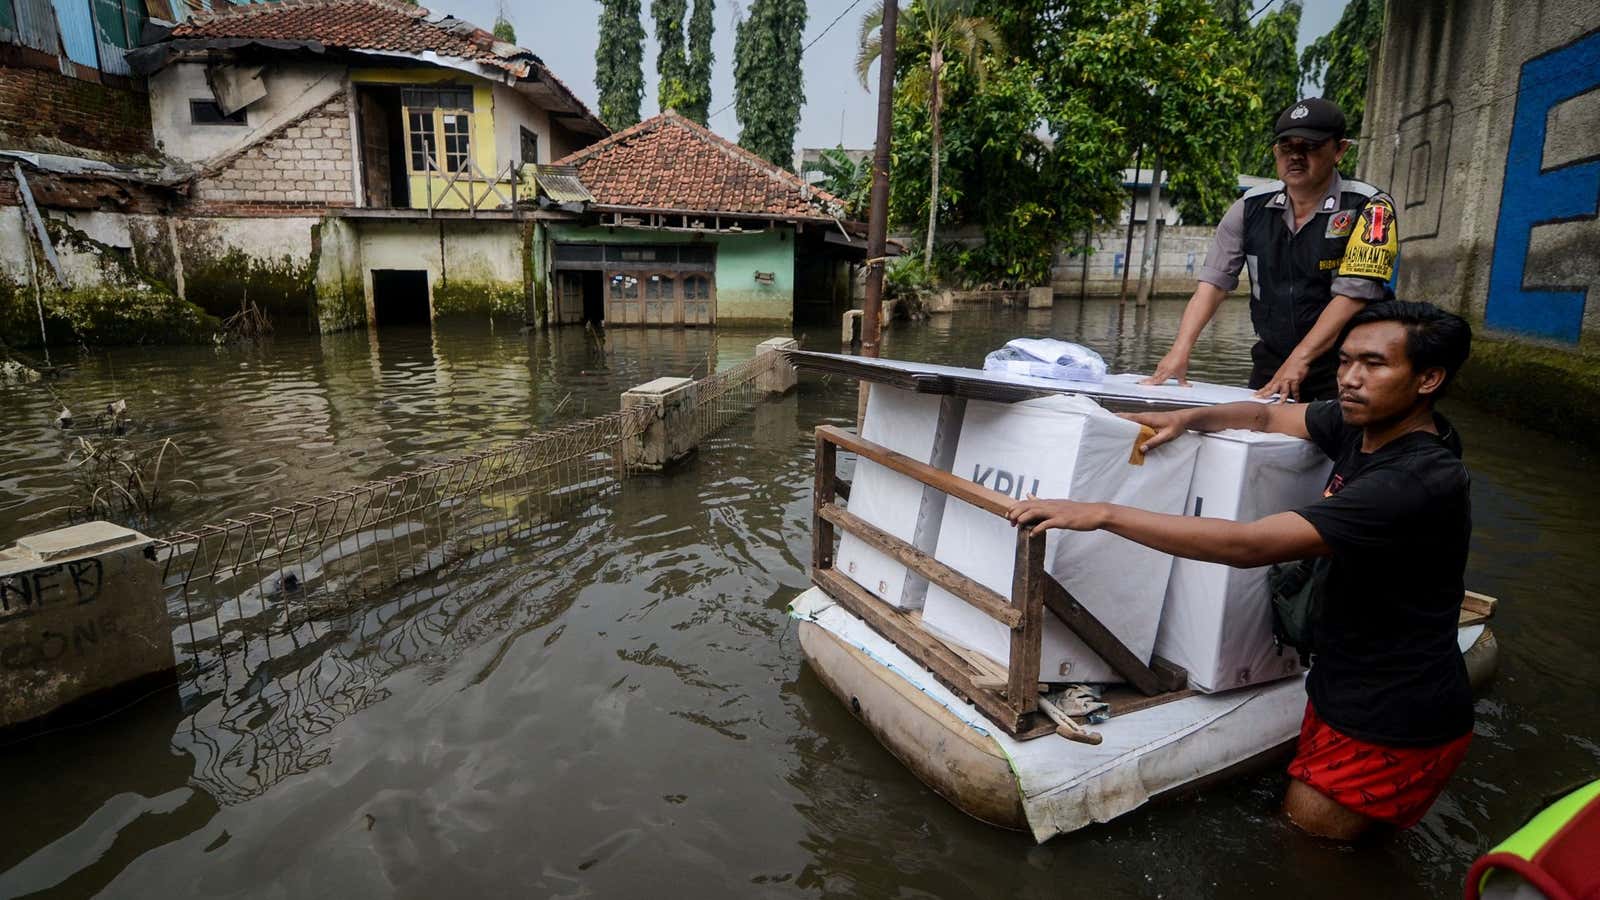 Officials transport election materials by raft in a flooded area of Indonesia’s Java island.